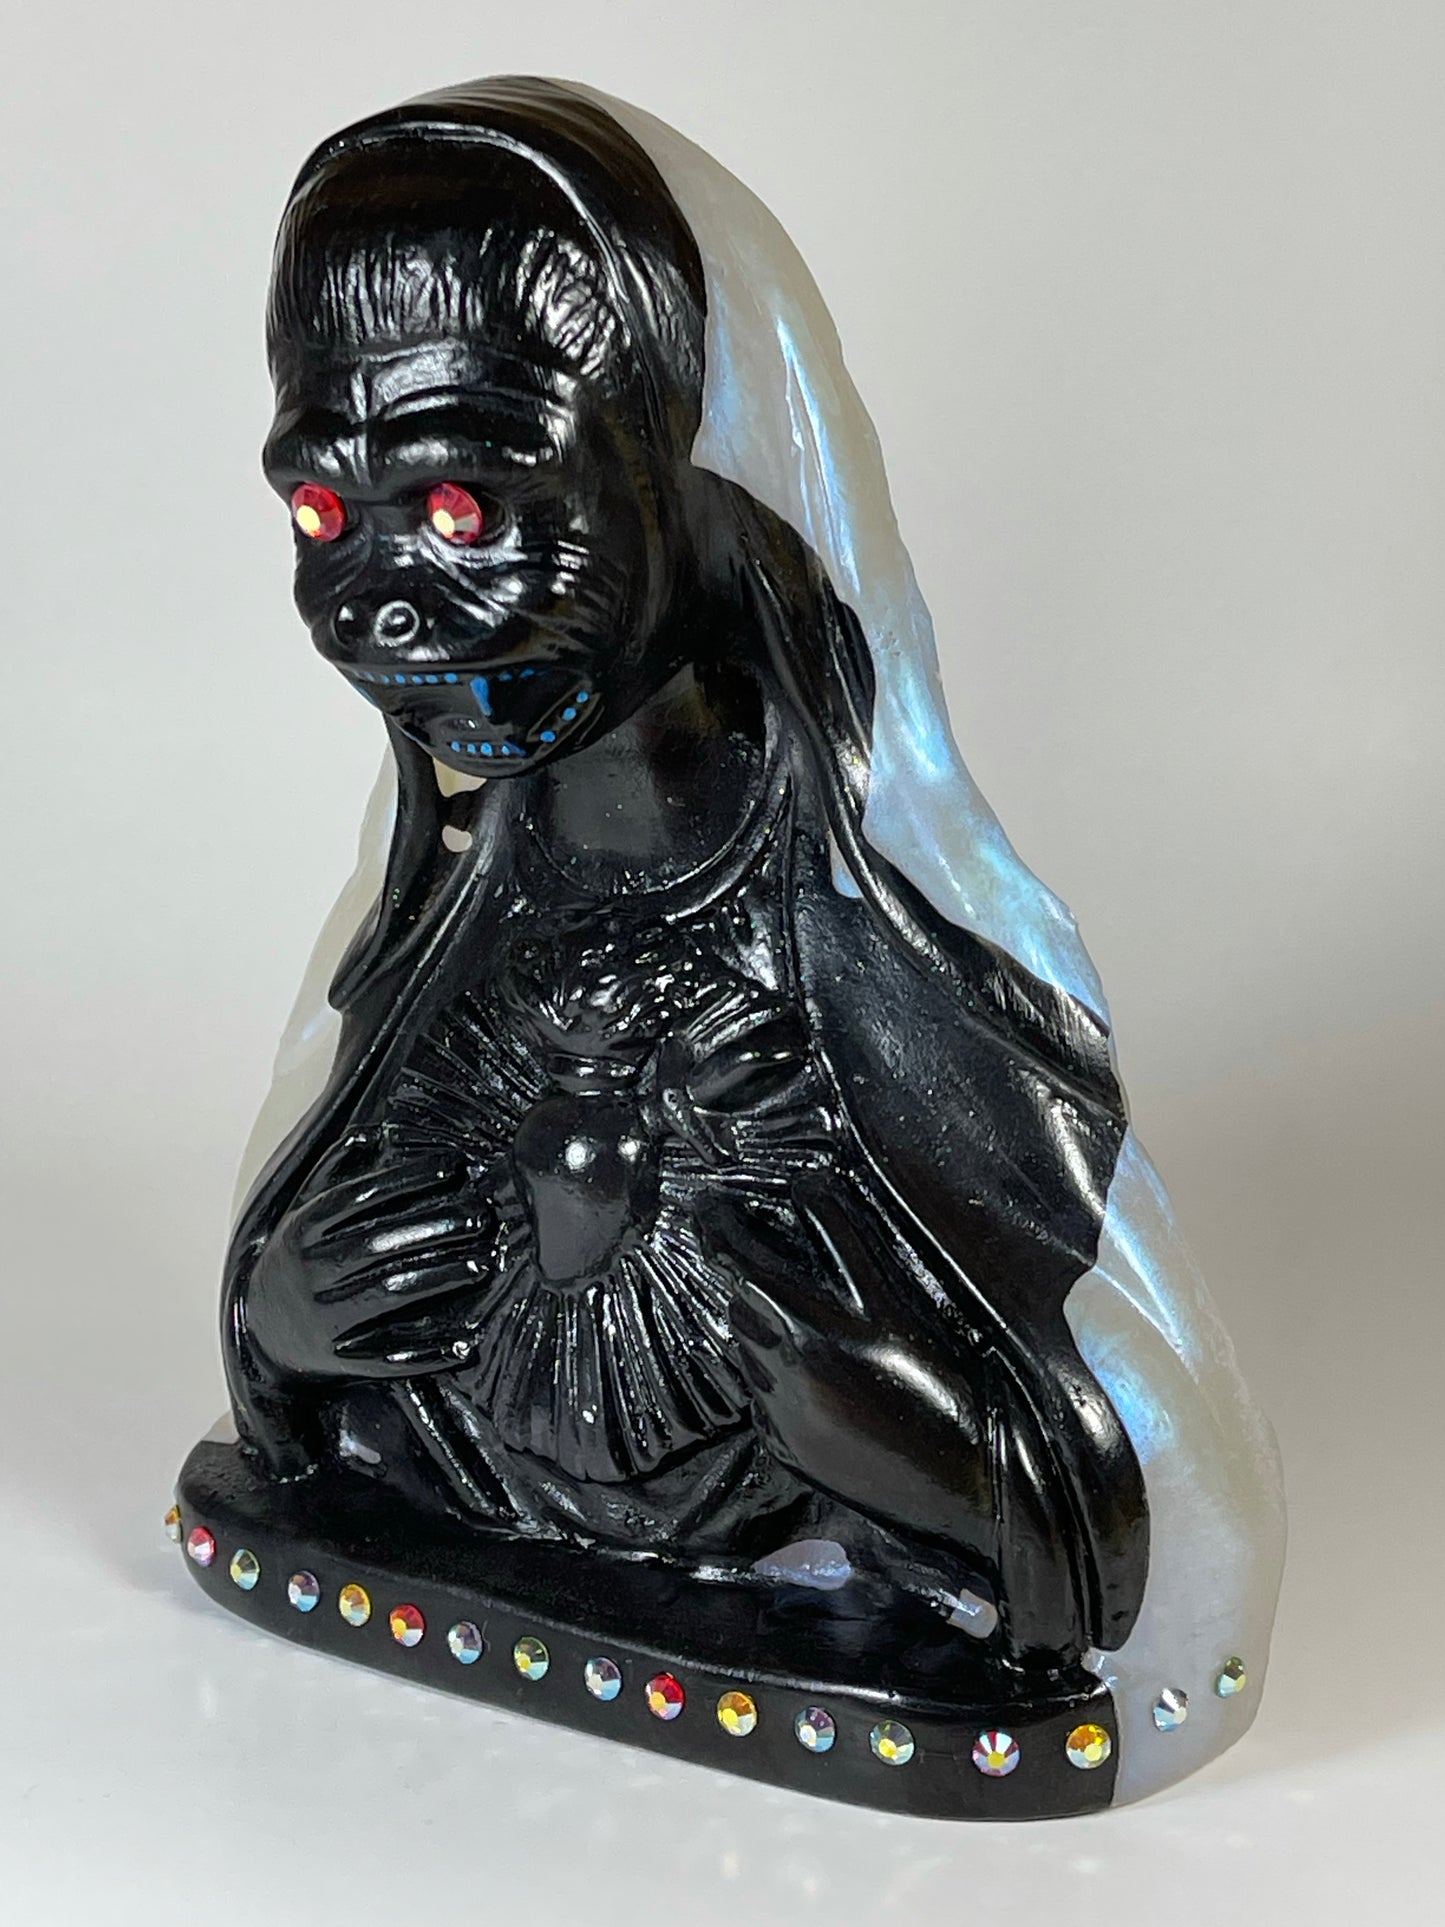 Sacred Heart of the Ape: Black Iron with Pearlescent Blue